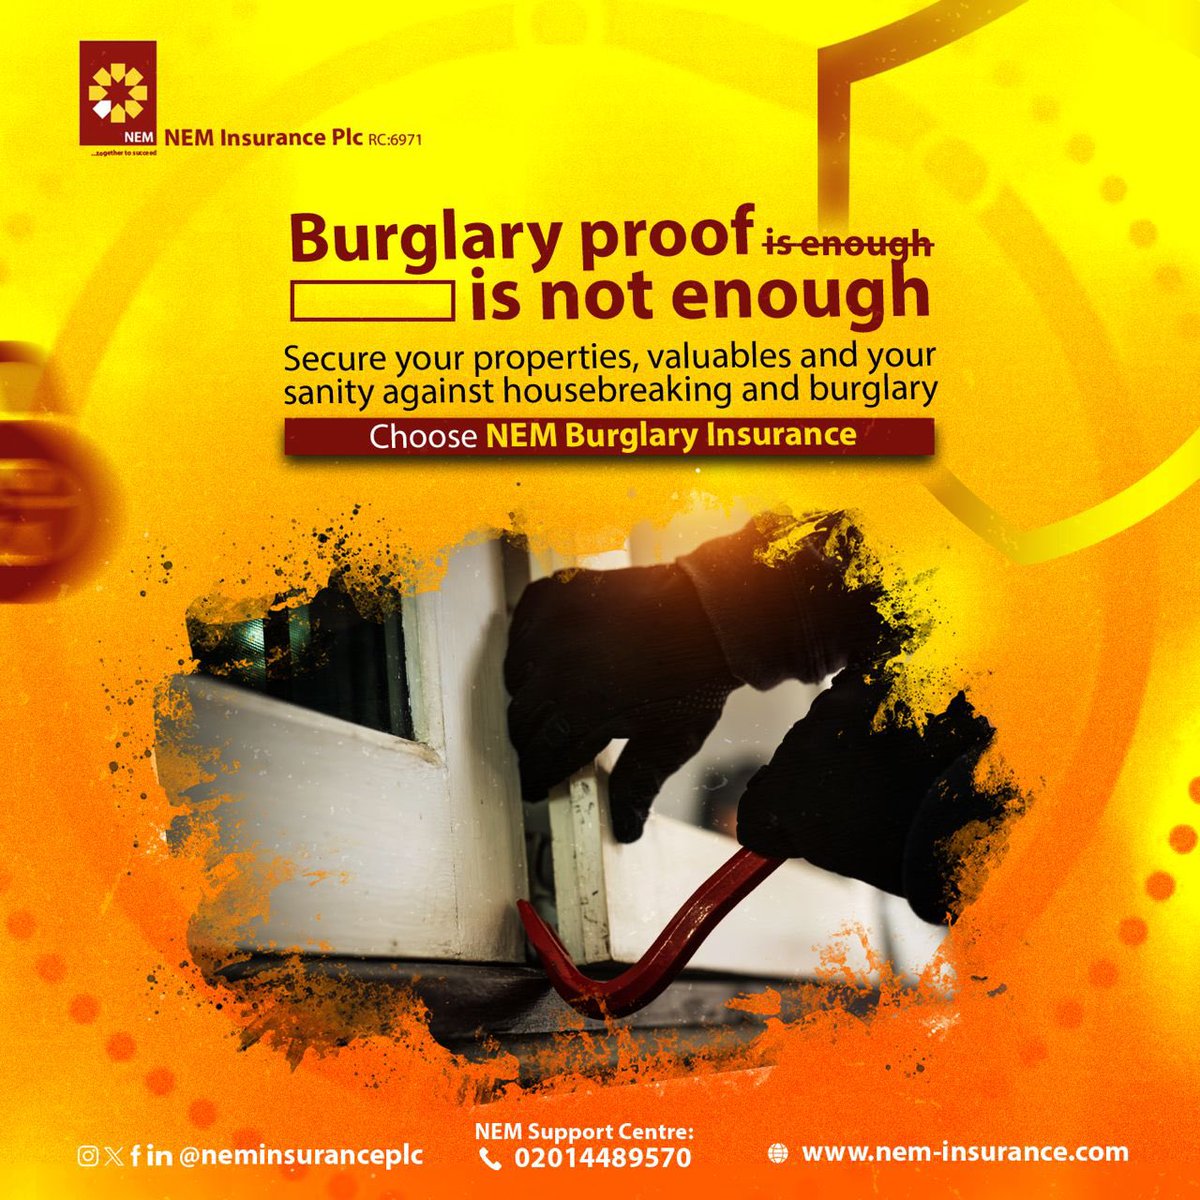 Burglary proof? That’s just the first step. For true peace of mind, step up with NEM Burglary Insurance. Send us a DM to get started today! #BurglaryInsurance #NEMInsurancePlc #BeNEMSure